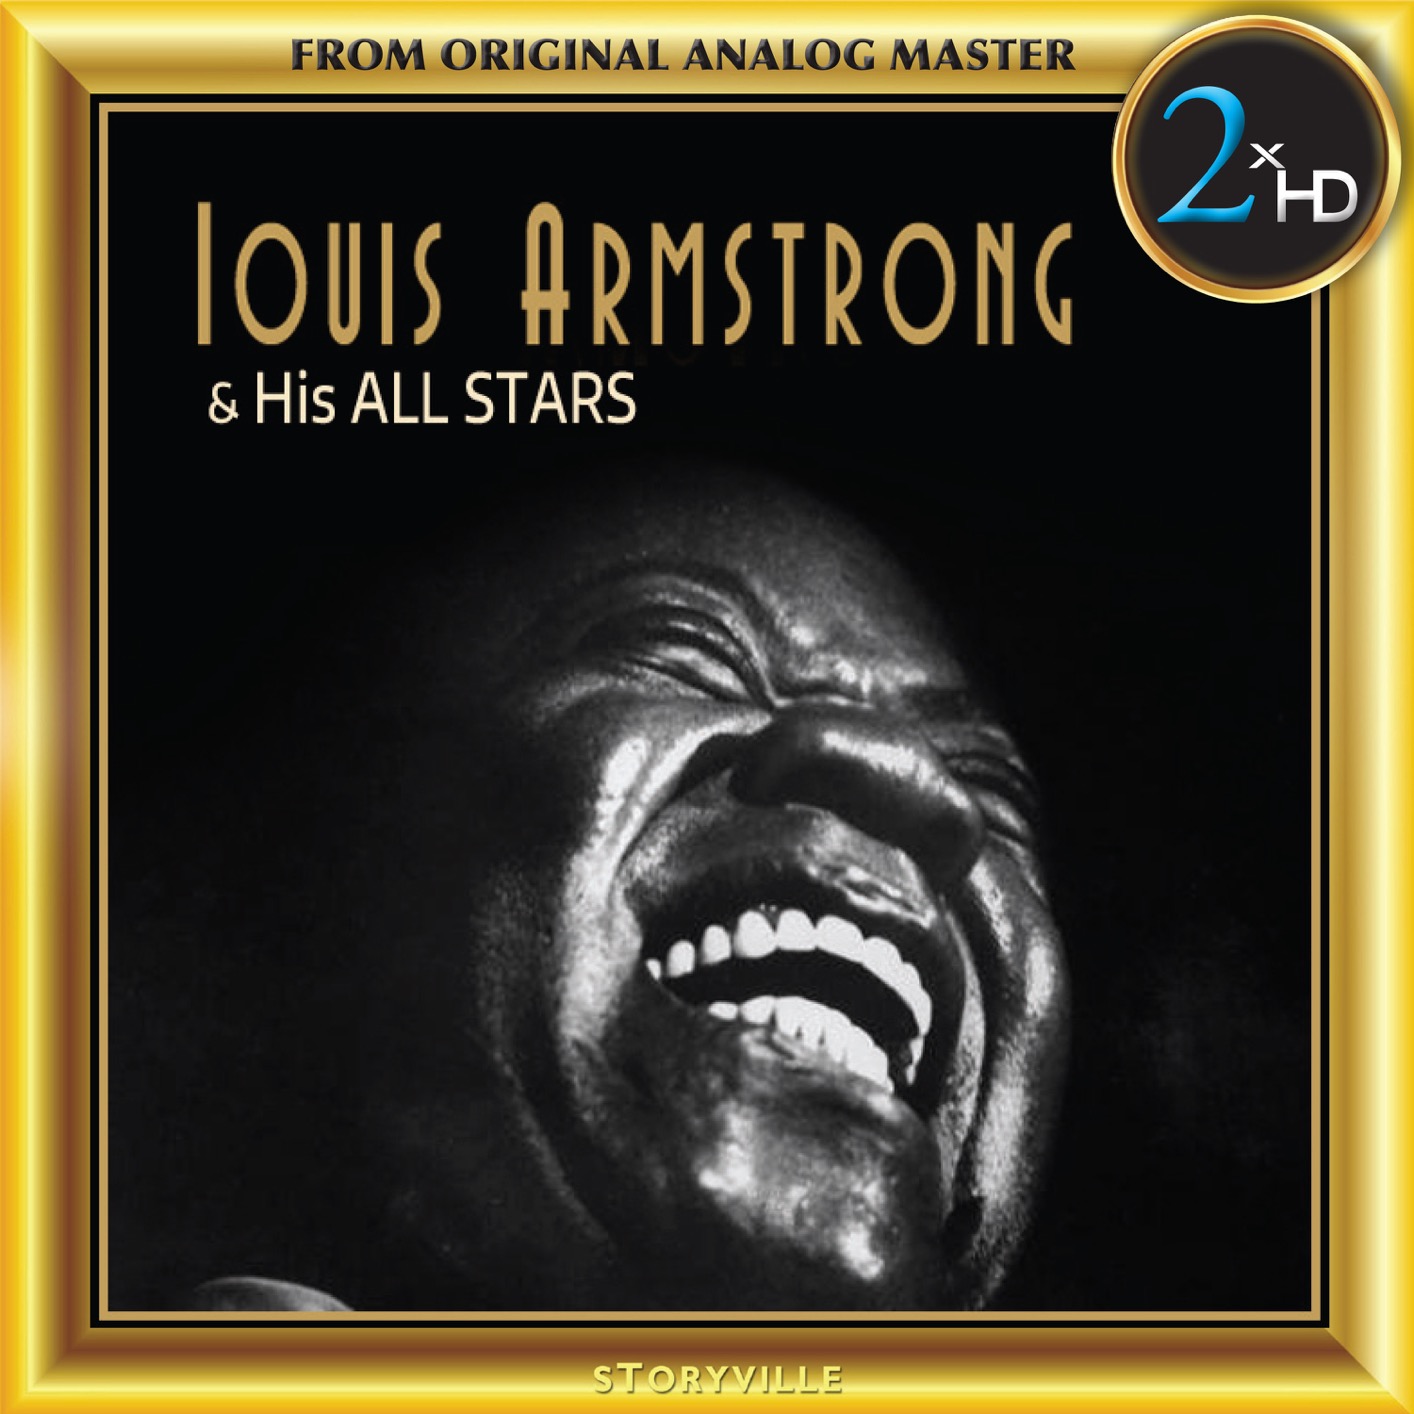 Louis Armstrong - Louis Armstrong & His All Stars (2018) [HDTracks DSF DSD128/5.64MHz + FLAC 24bit/96kHz]